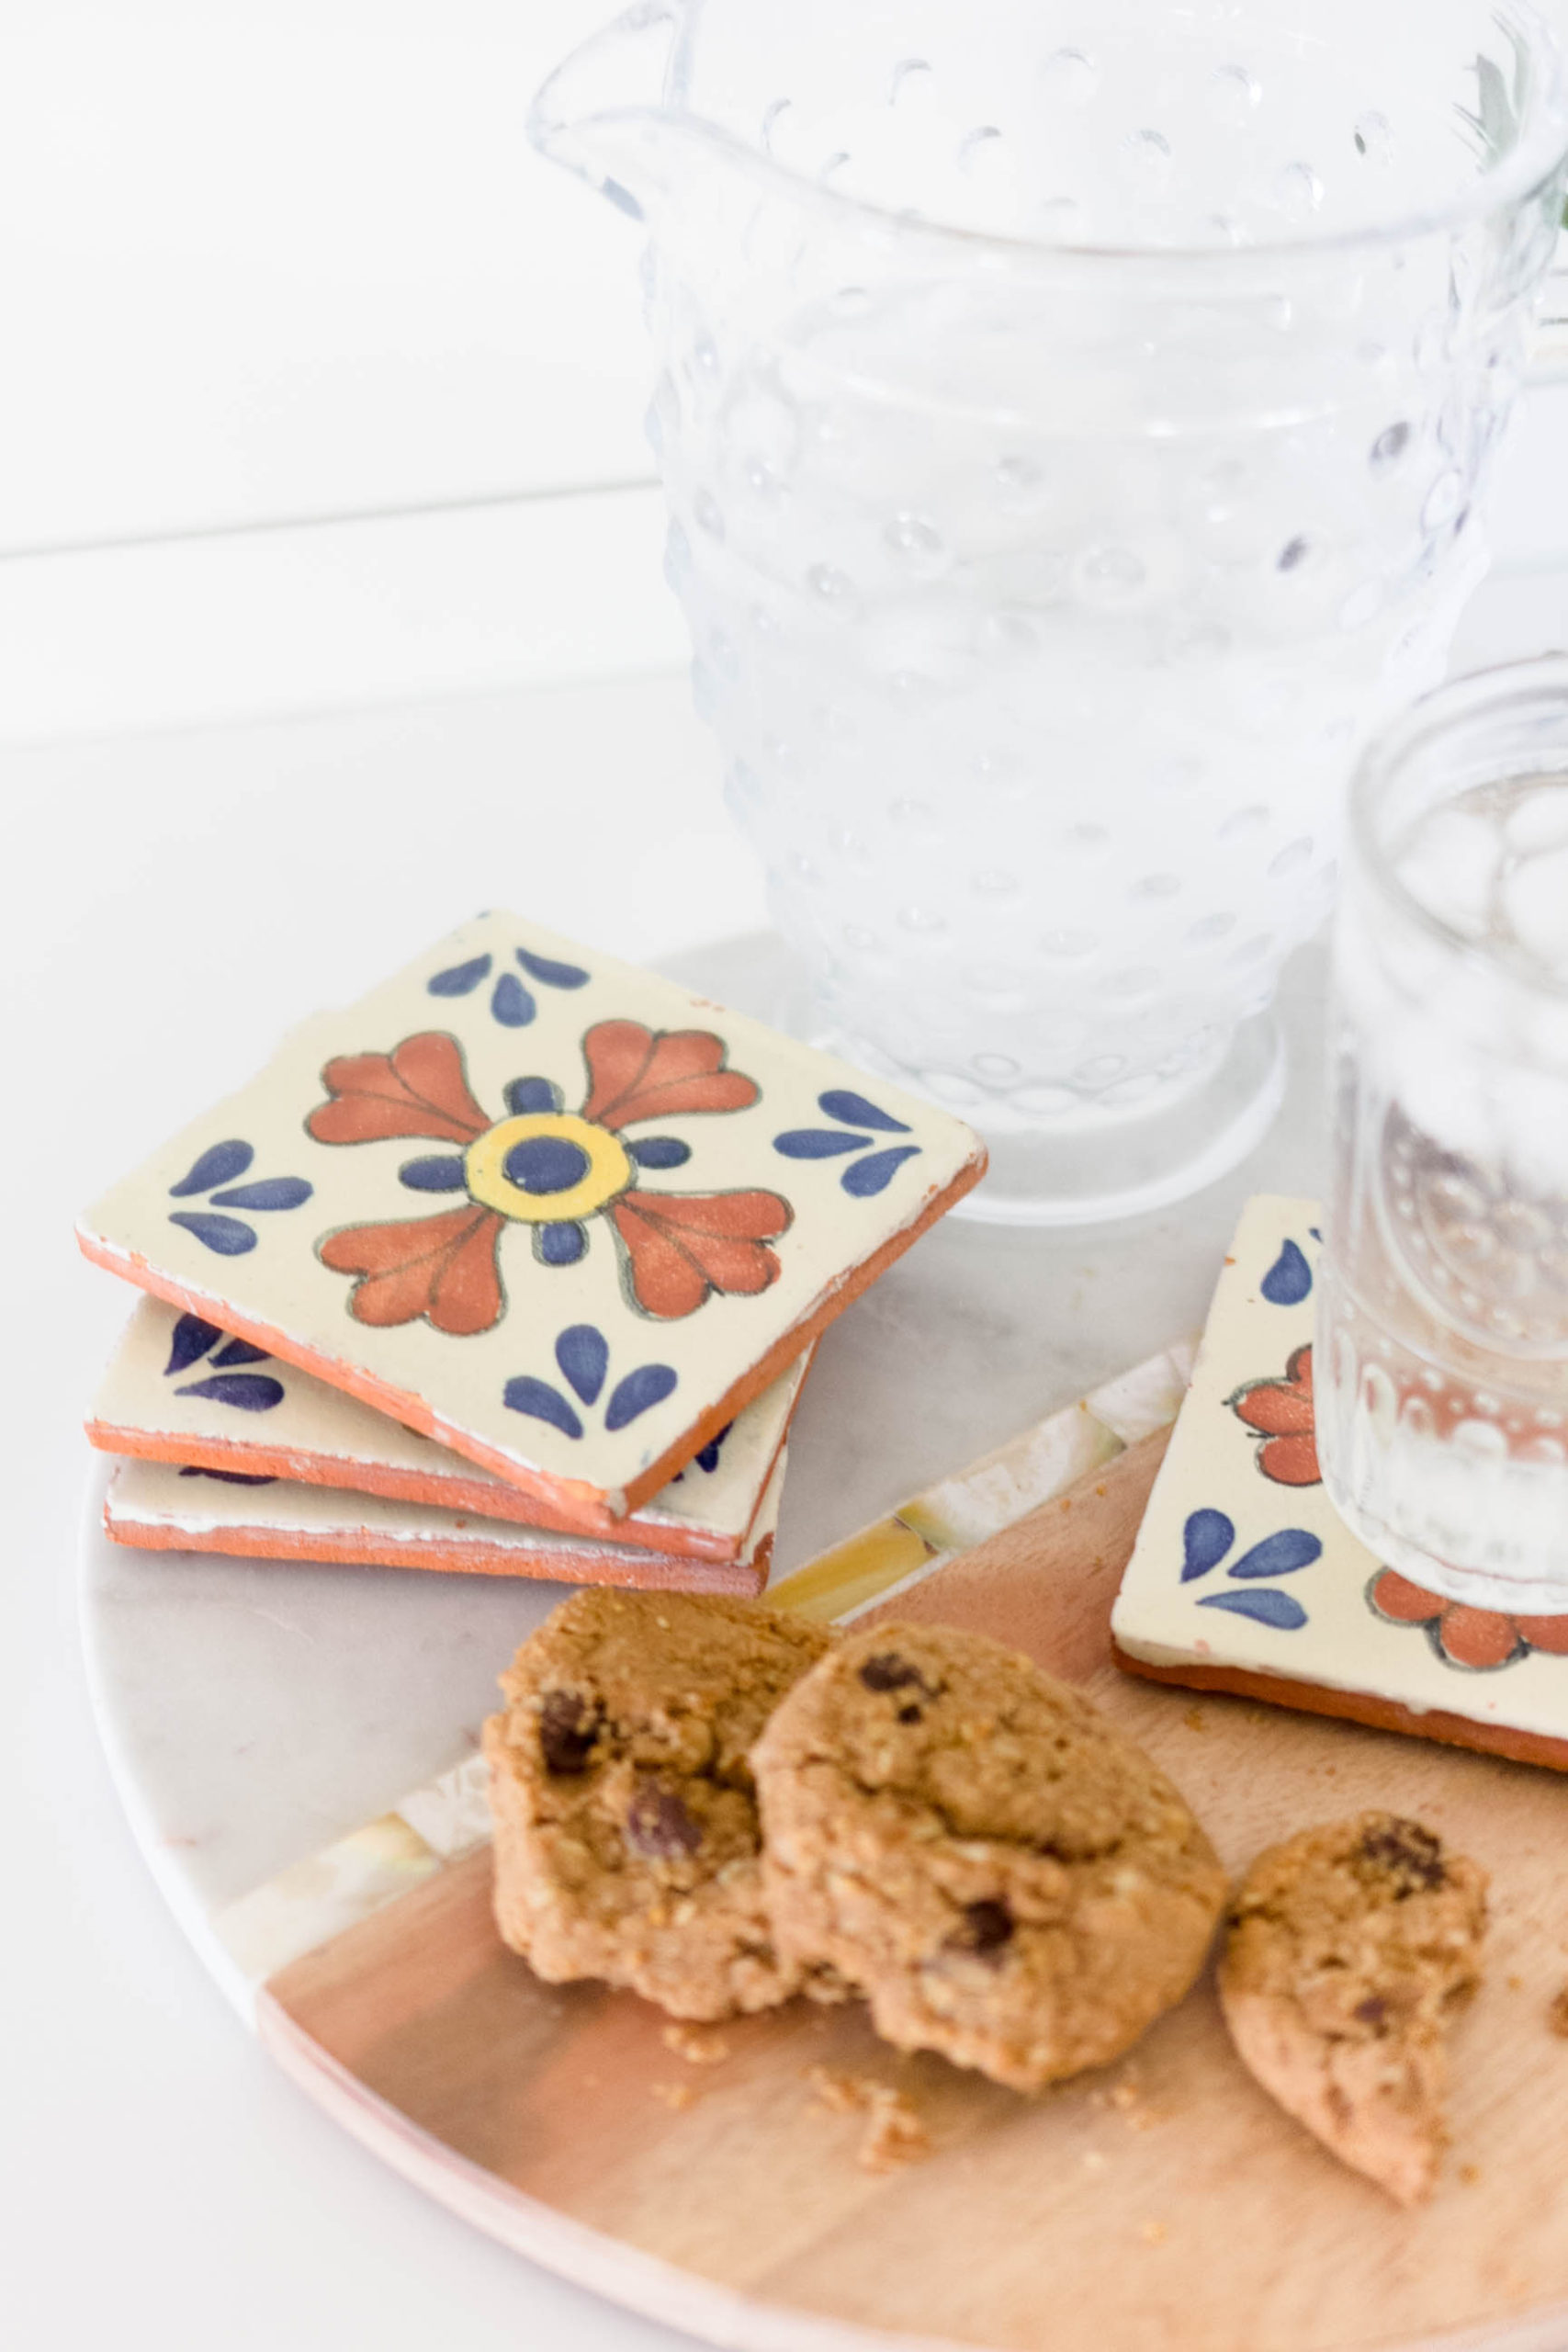 Incorporate Patterned Tile into your decor without replacing you current tile. Try this simple patterned tile coasters instead! Tutorial by IrisNacole.com